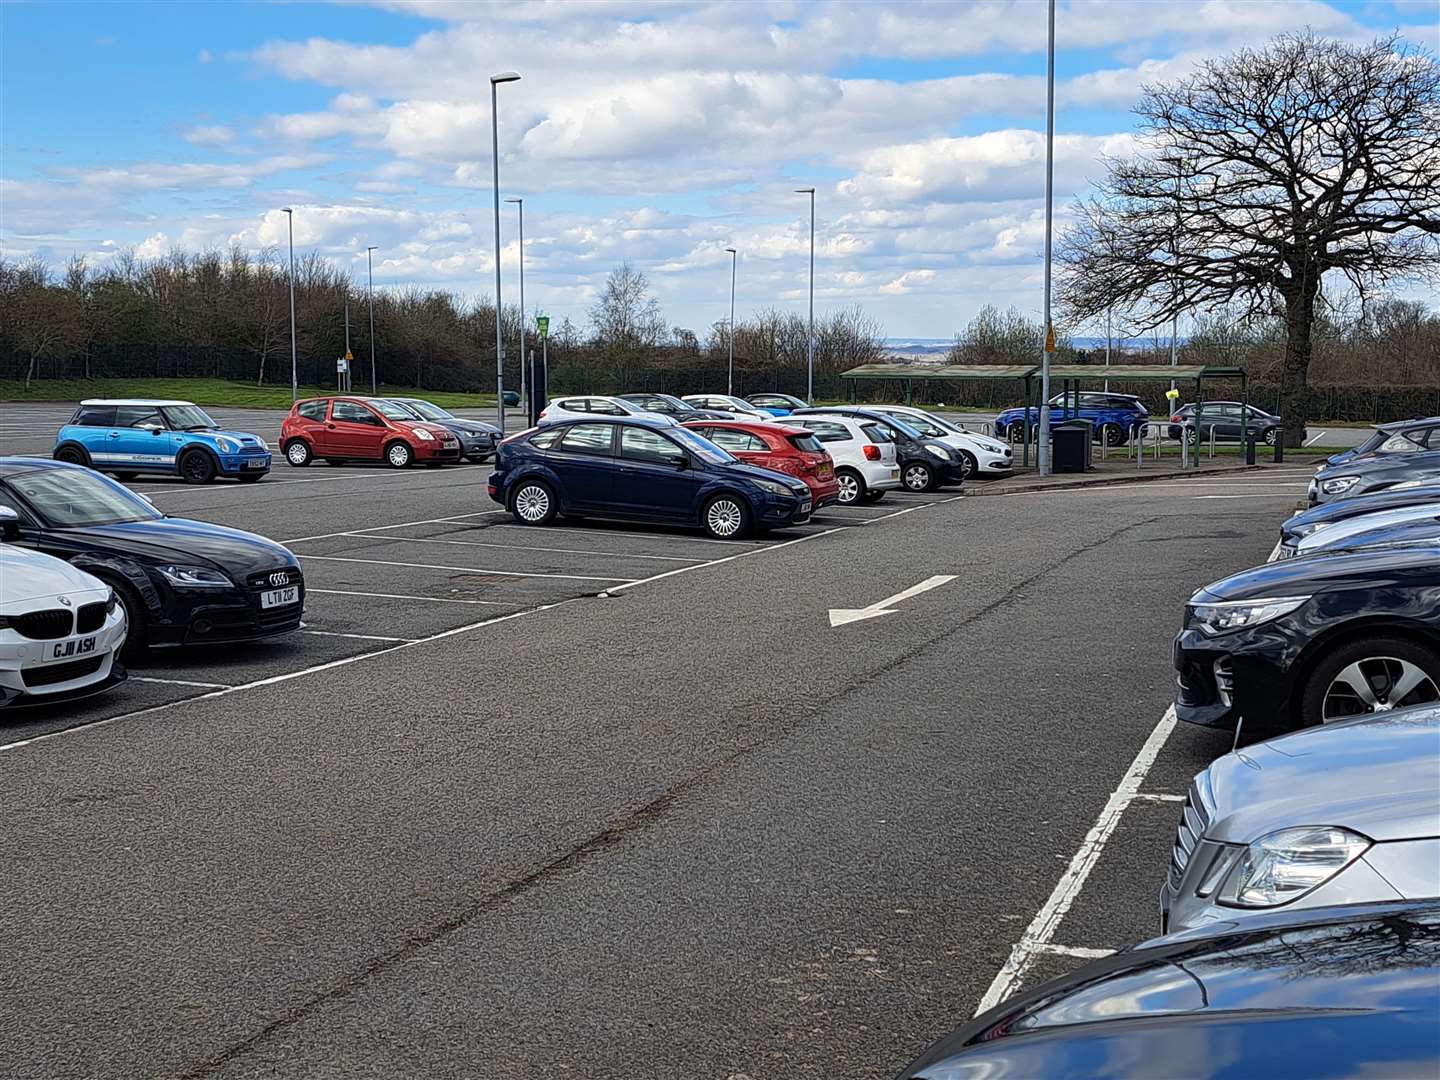 The 278-space car park will close after being plagued by nuisance car rallies